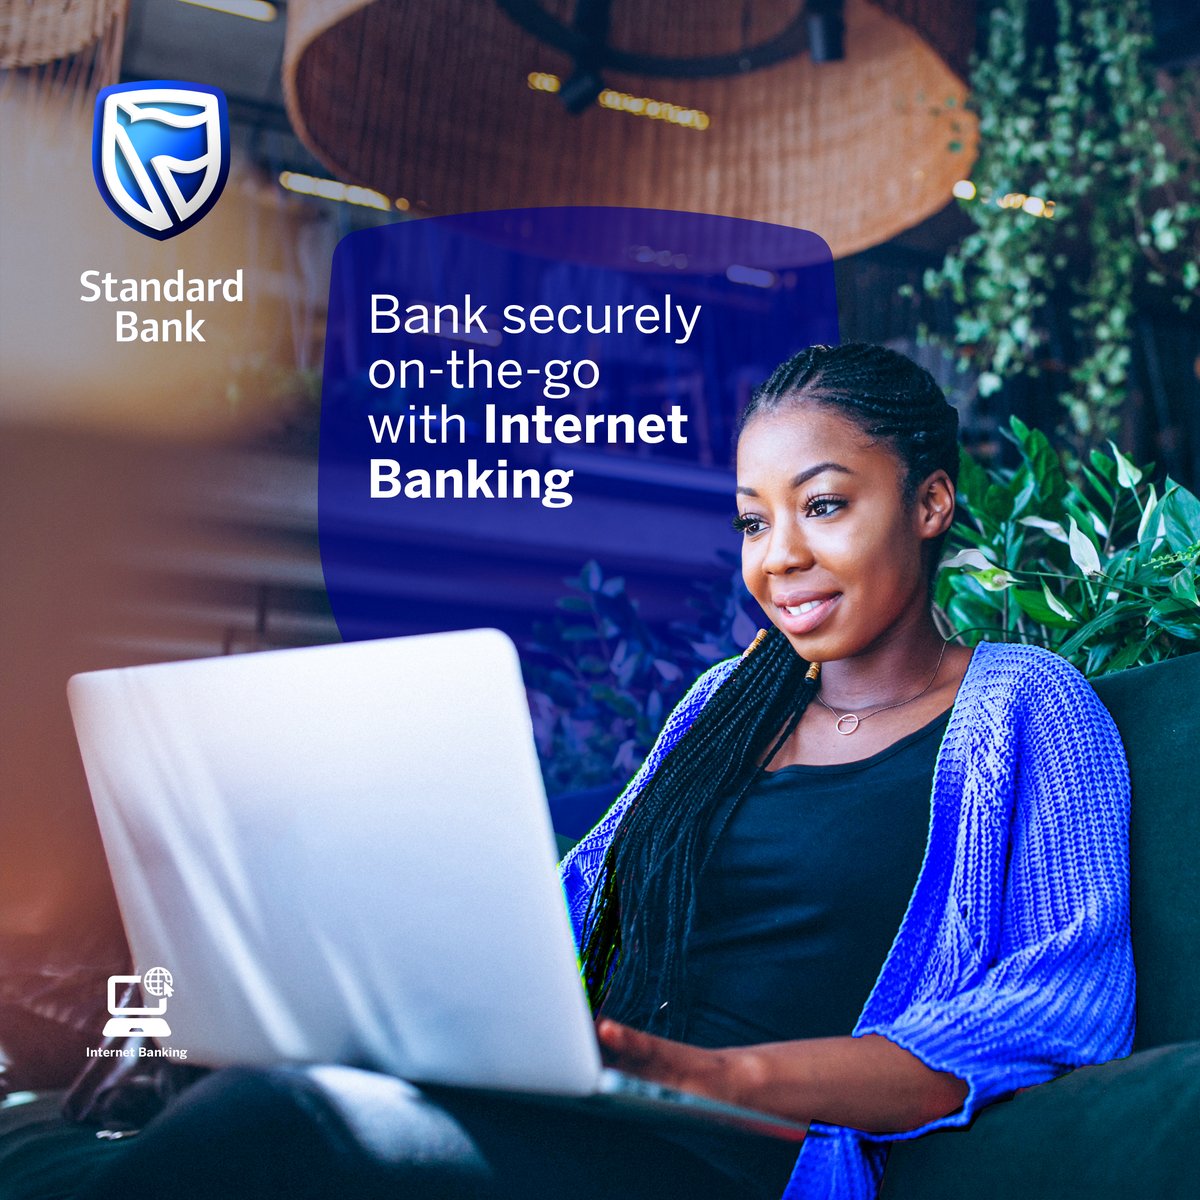 Manage your finances anywhere, anytime with Internet Banking. 😊
Call 2517 5300 to register today.
#InternetBanking #DigitalBanking